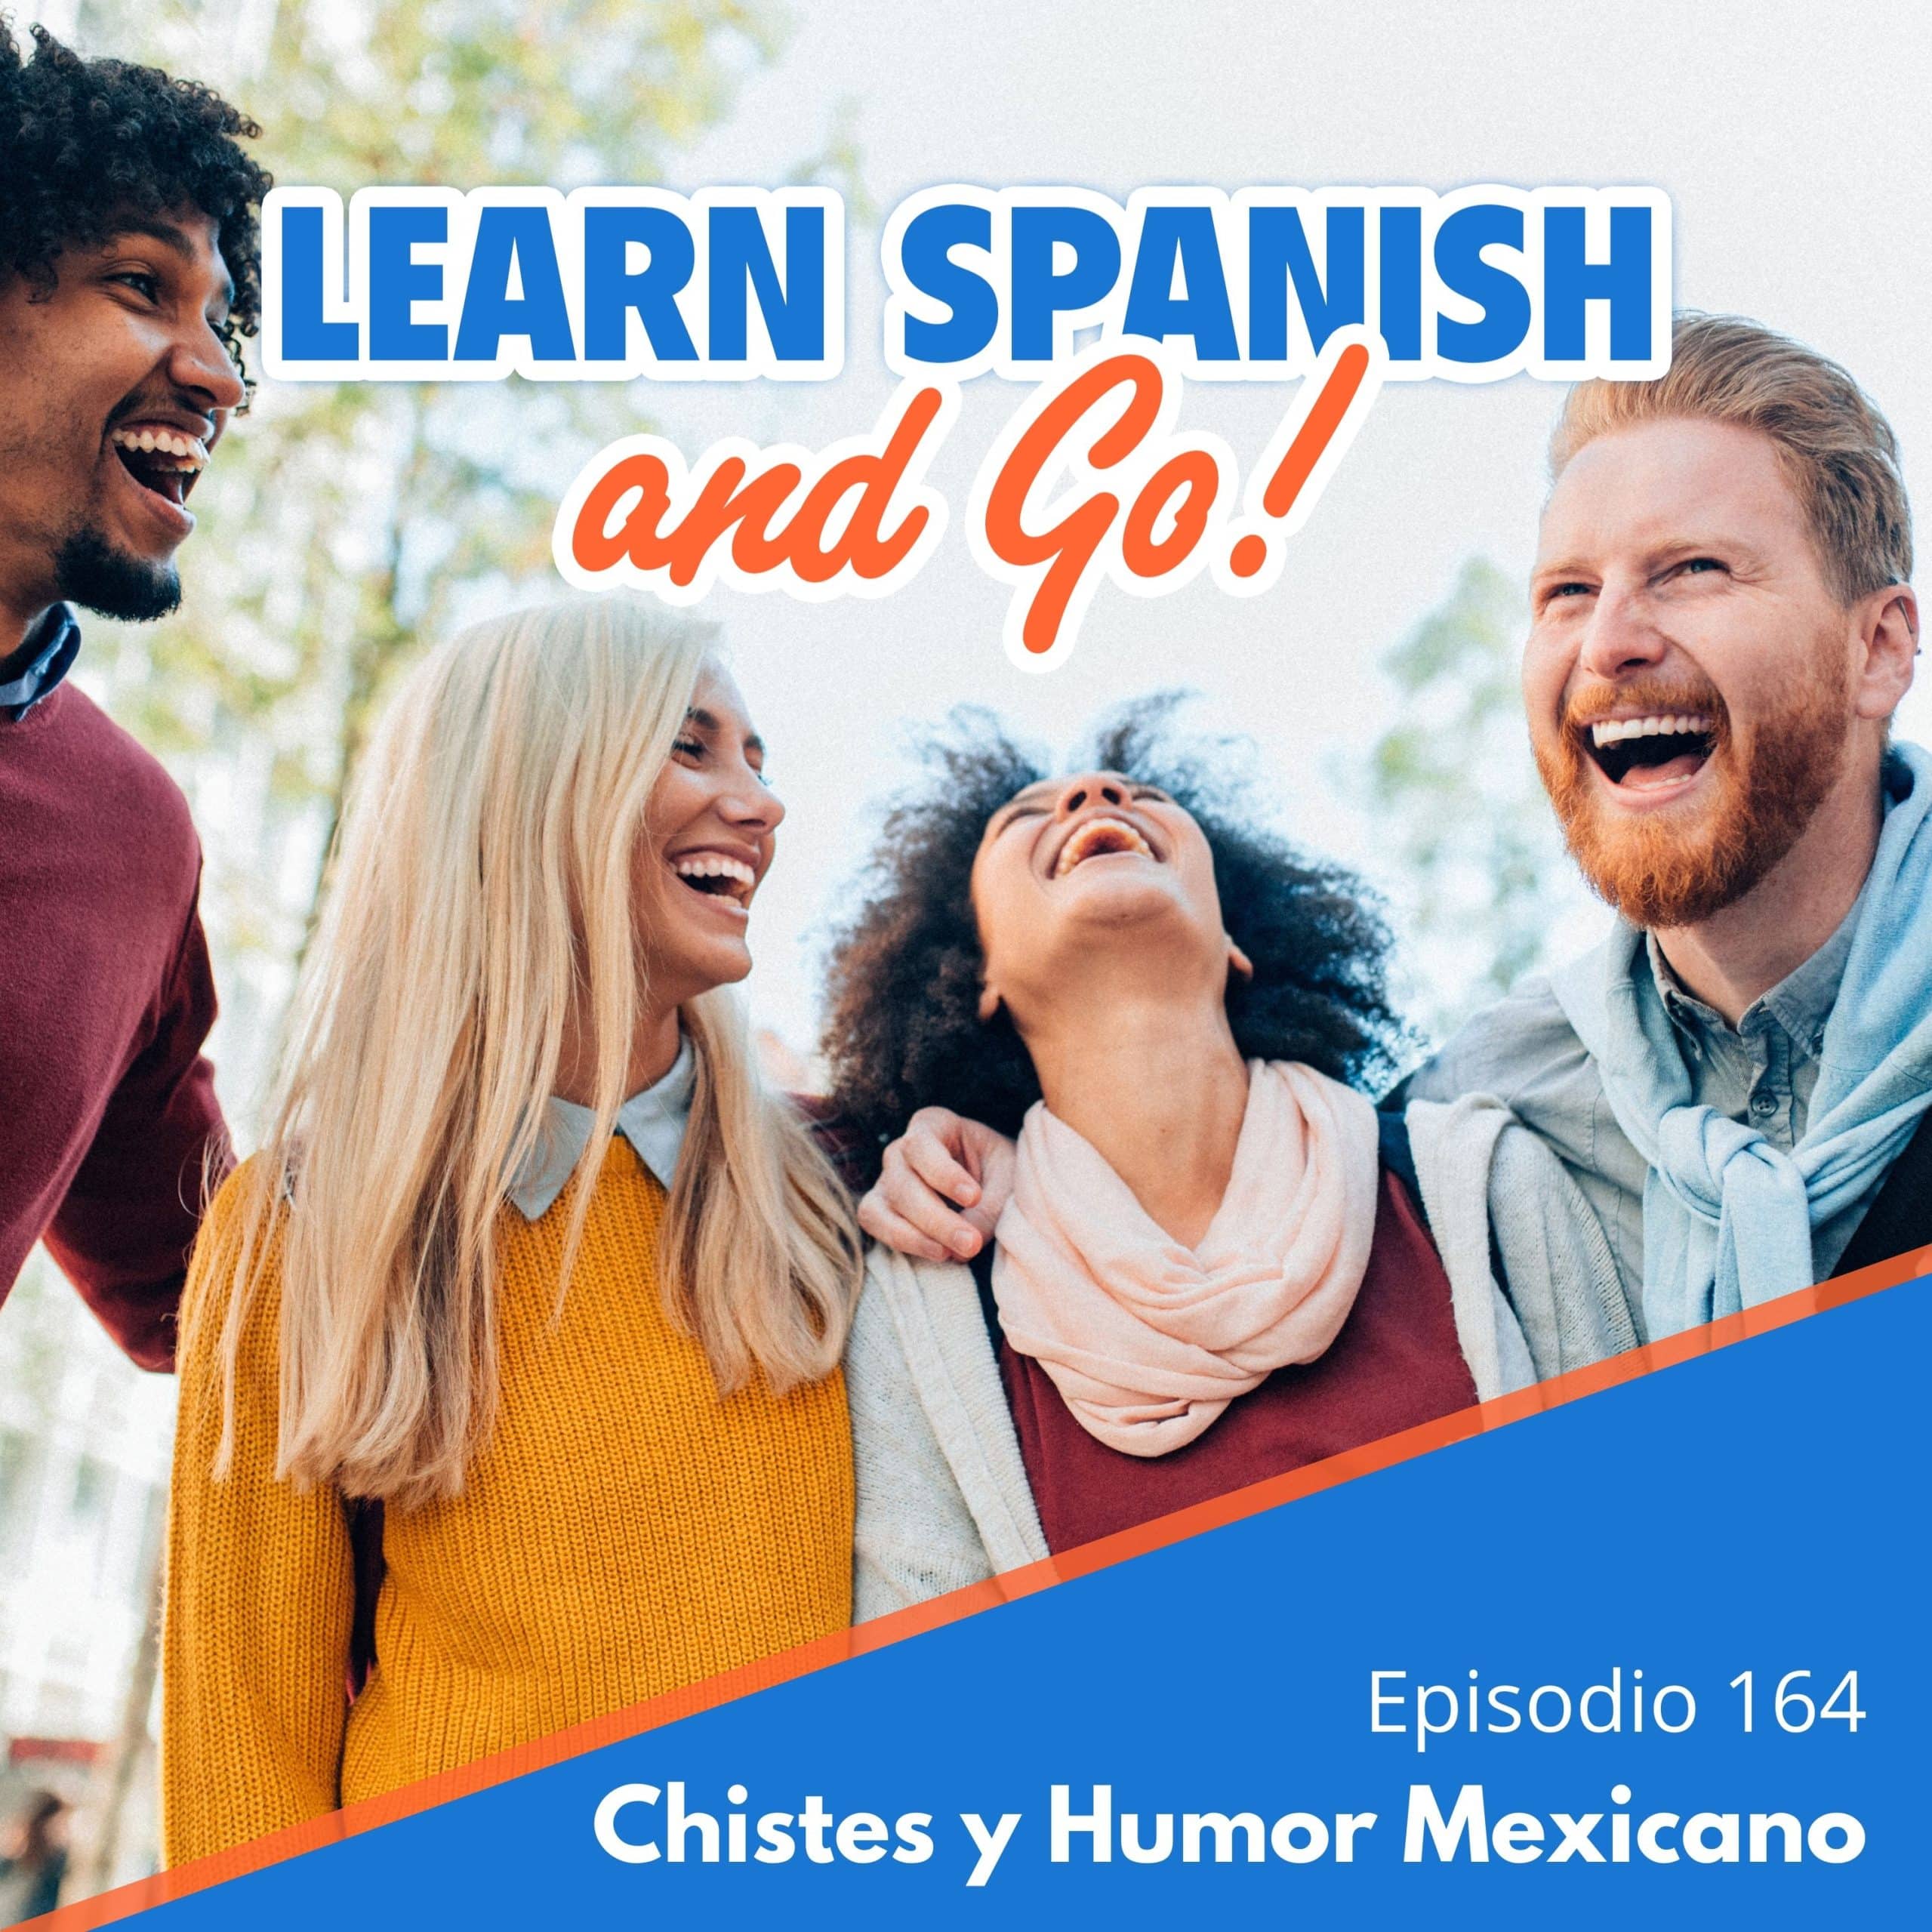 164 - Chistes y Humor Mexicano | Jokes and Mexican Humor - Spanish and Go